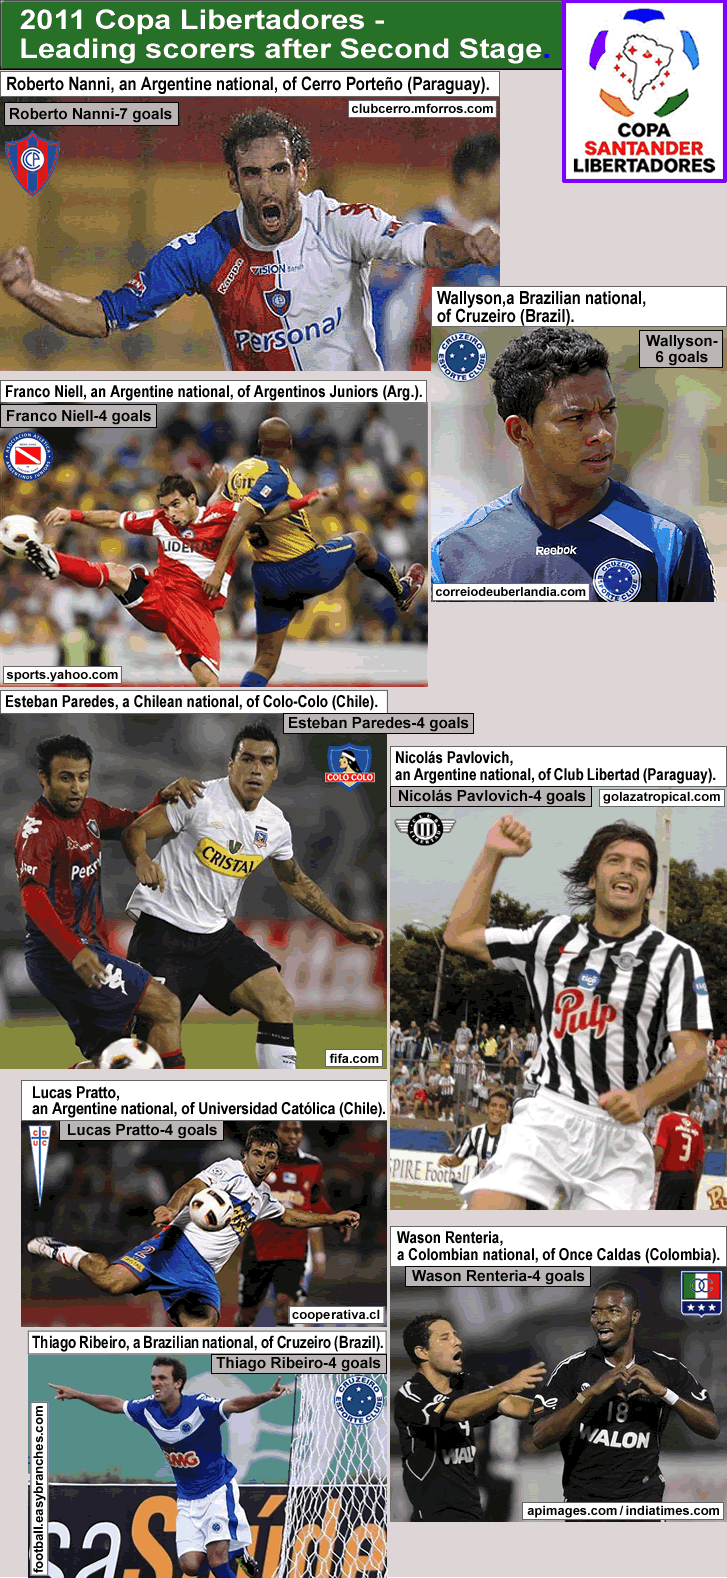 copa-libertadores2011_leading-scorers-after-2nd-stage_top8_d.gif